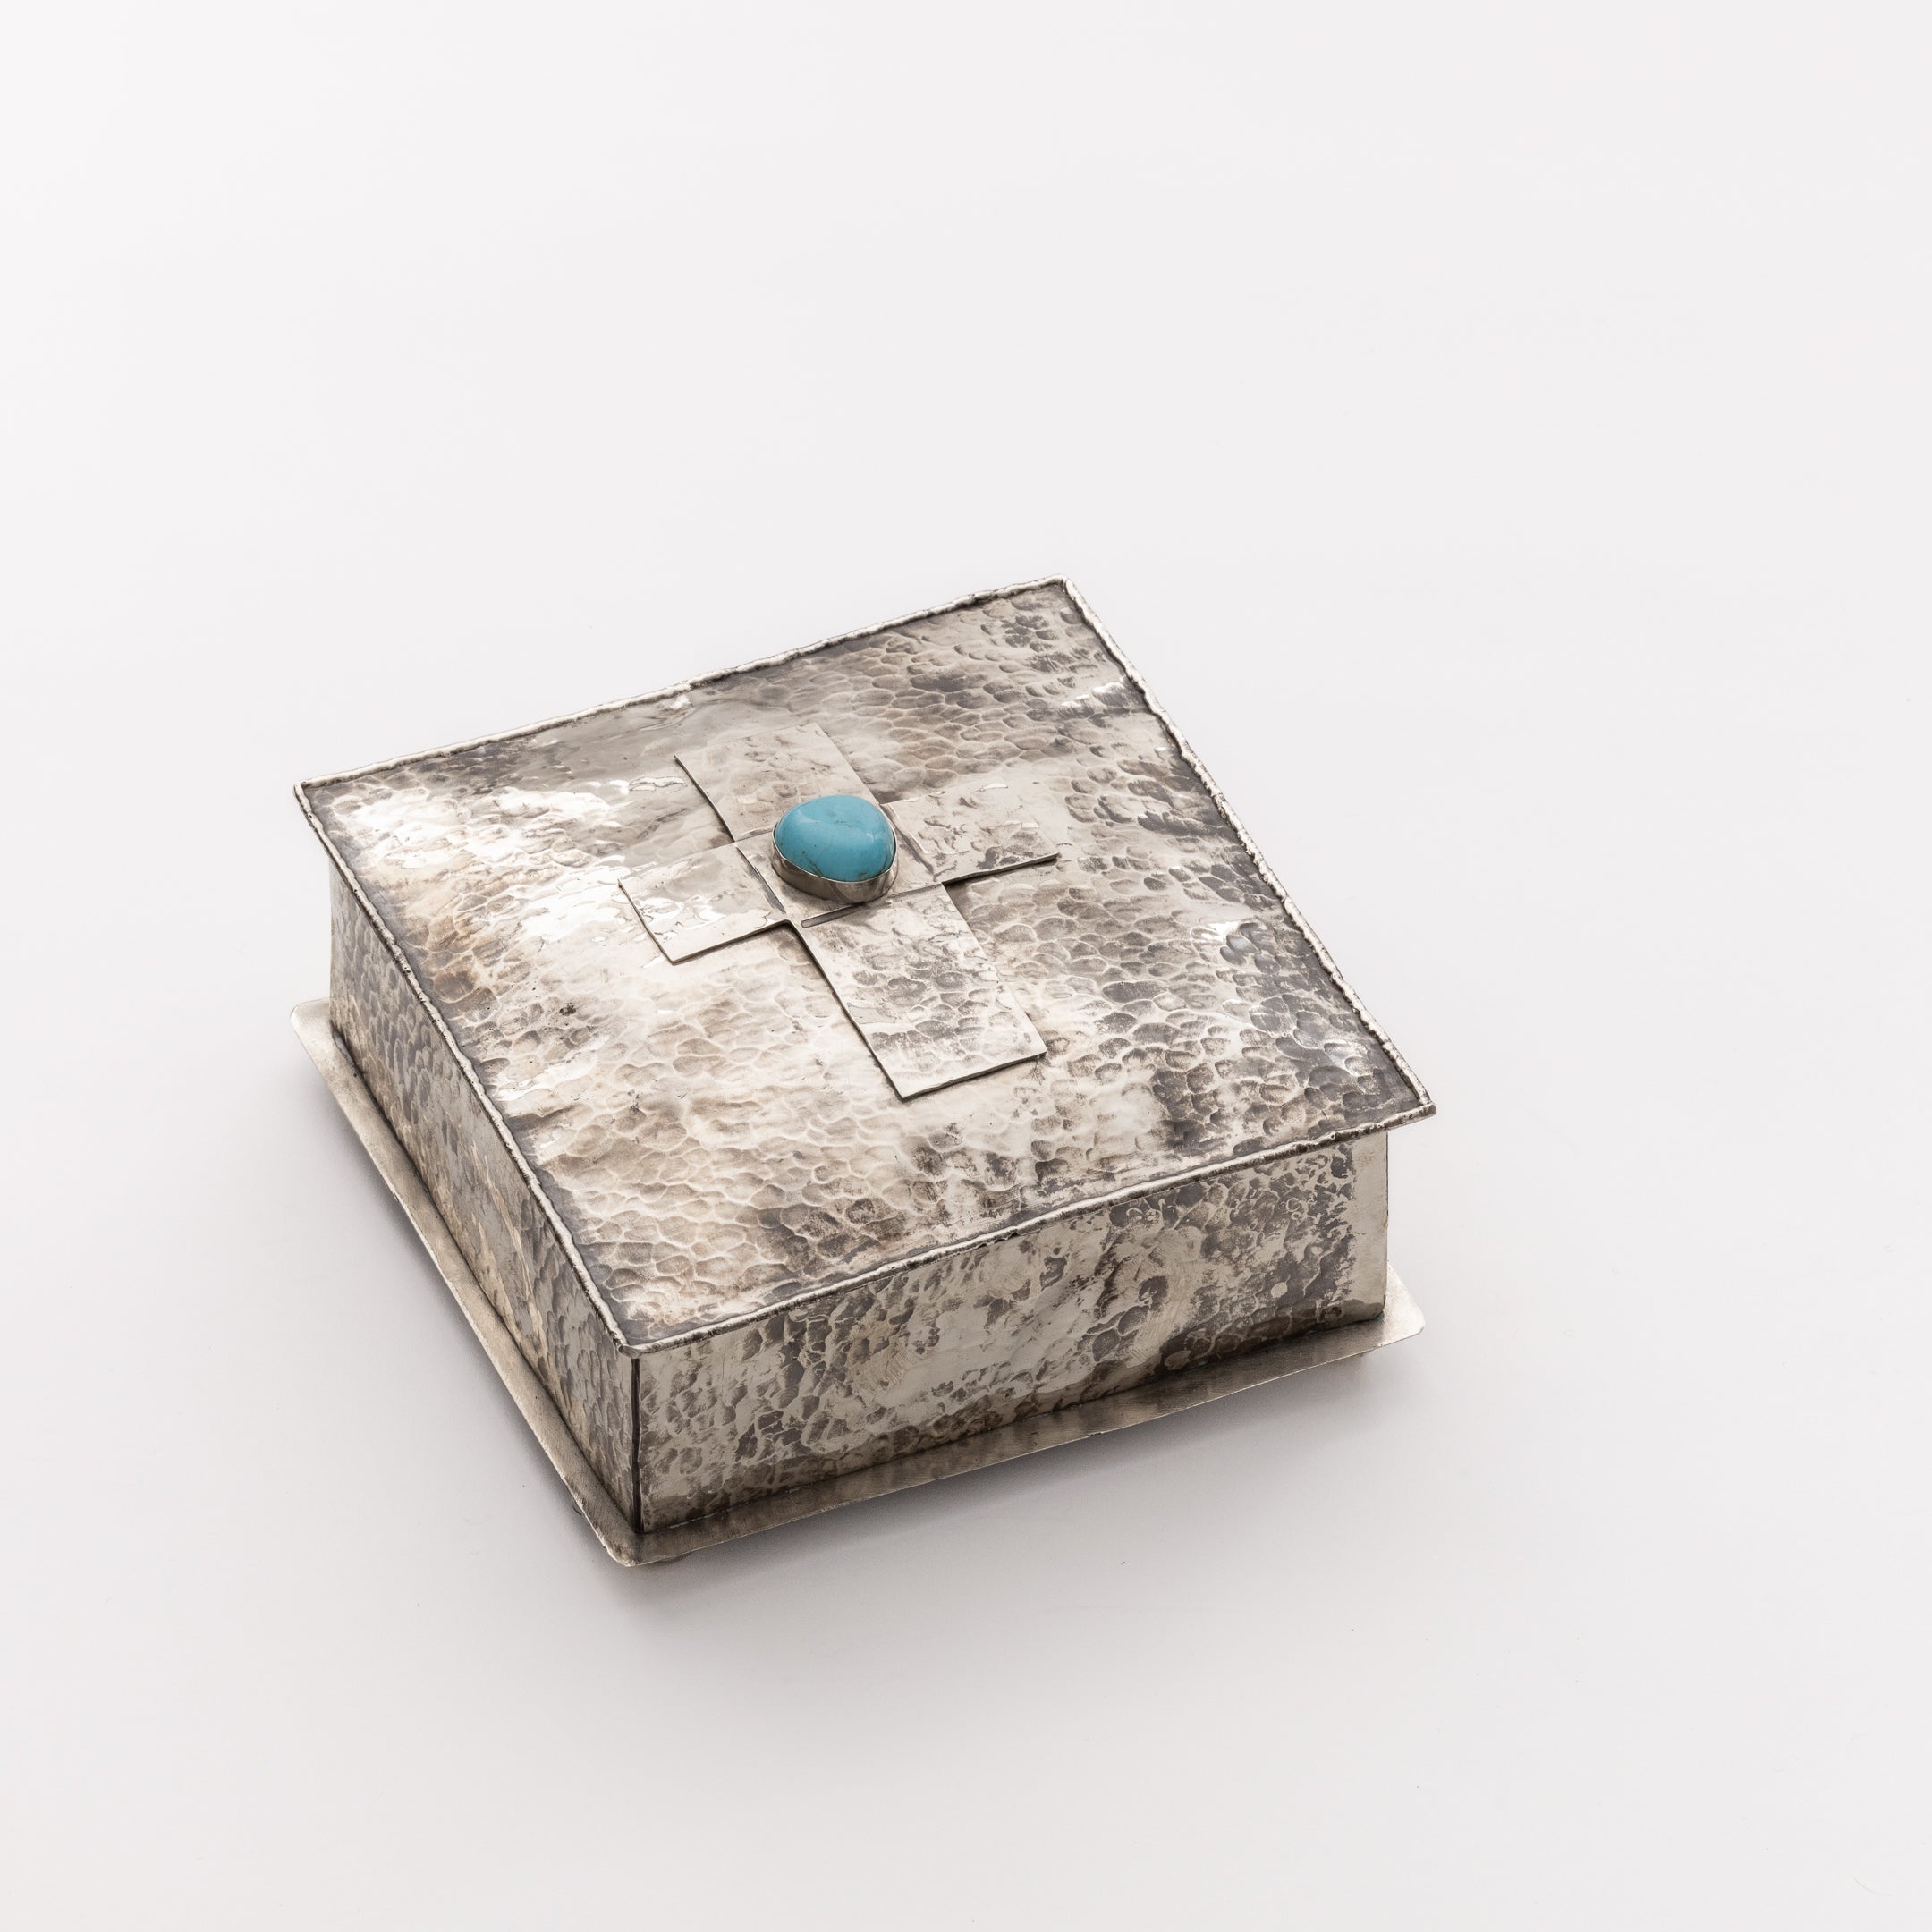 SILVER 6X6 DIMPLED BOX W- CROSS AND 1 TURQ STONE